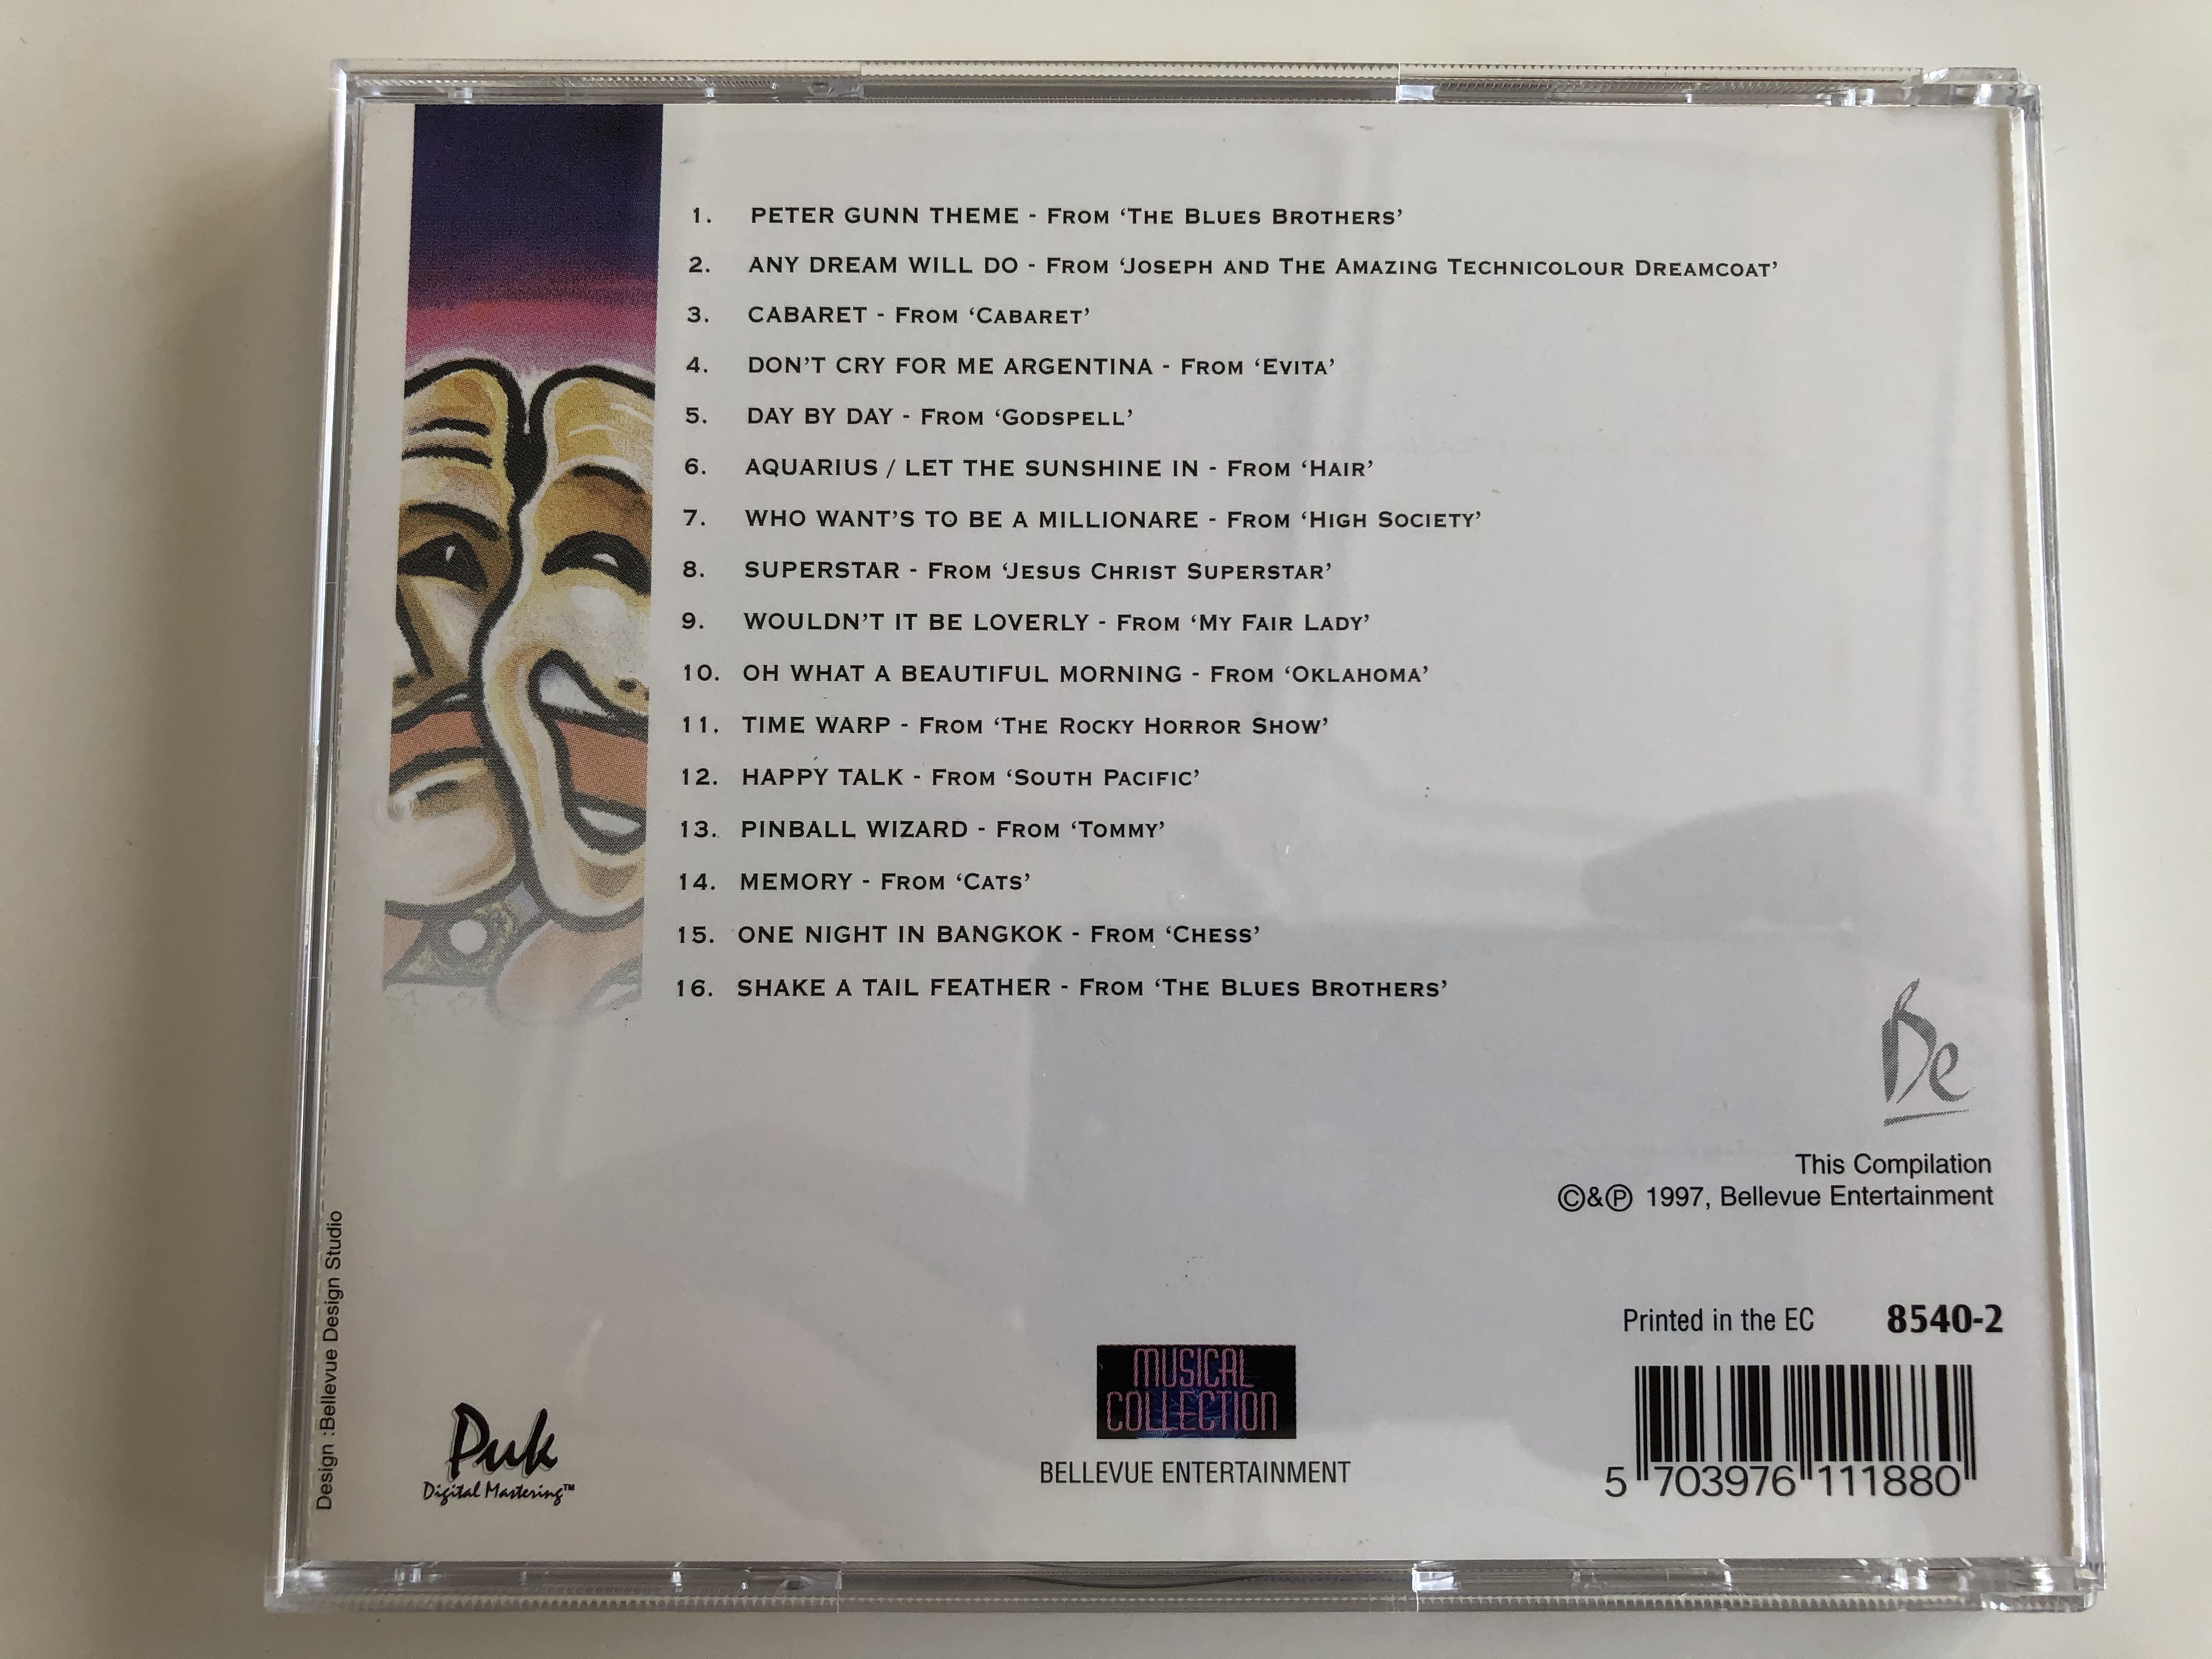 esential-showstoppers-includes-don-t-cry-for-me-argentina-day-by-day-oh-what-a-beautiful-morning-happy-talk-bellevue-entertainment-audio-cd-1997-8540-2-4-.jpg